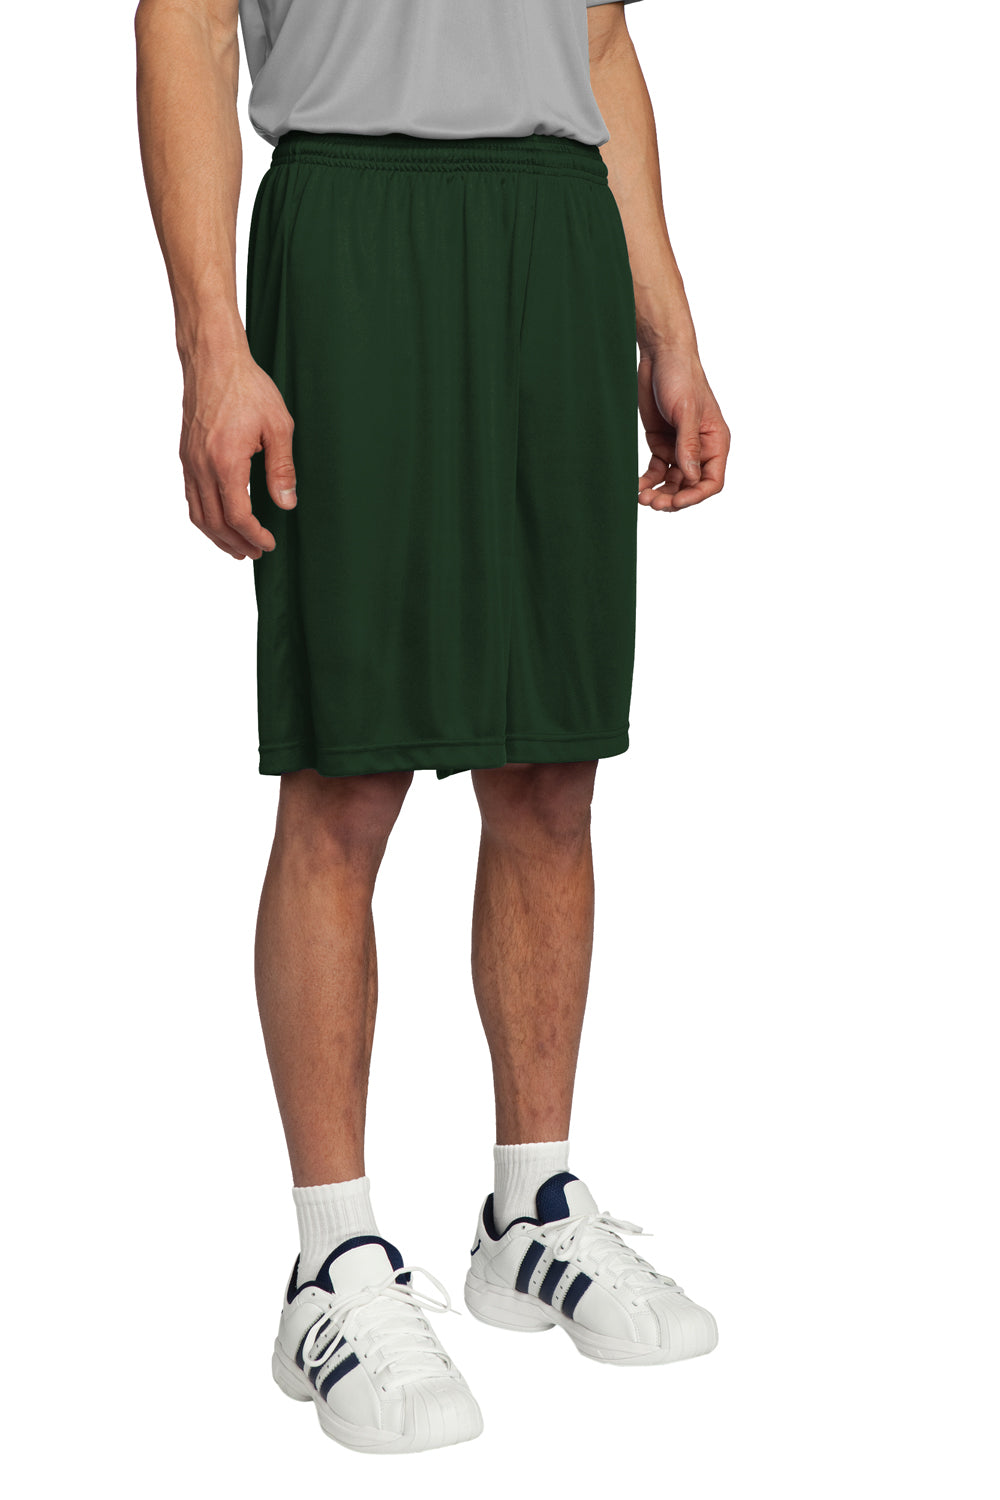 Sport-Tek ST355 PosiCharge Competitor Shorts Forest Green 3Q